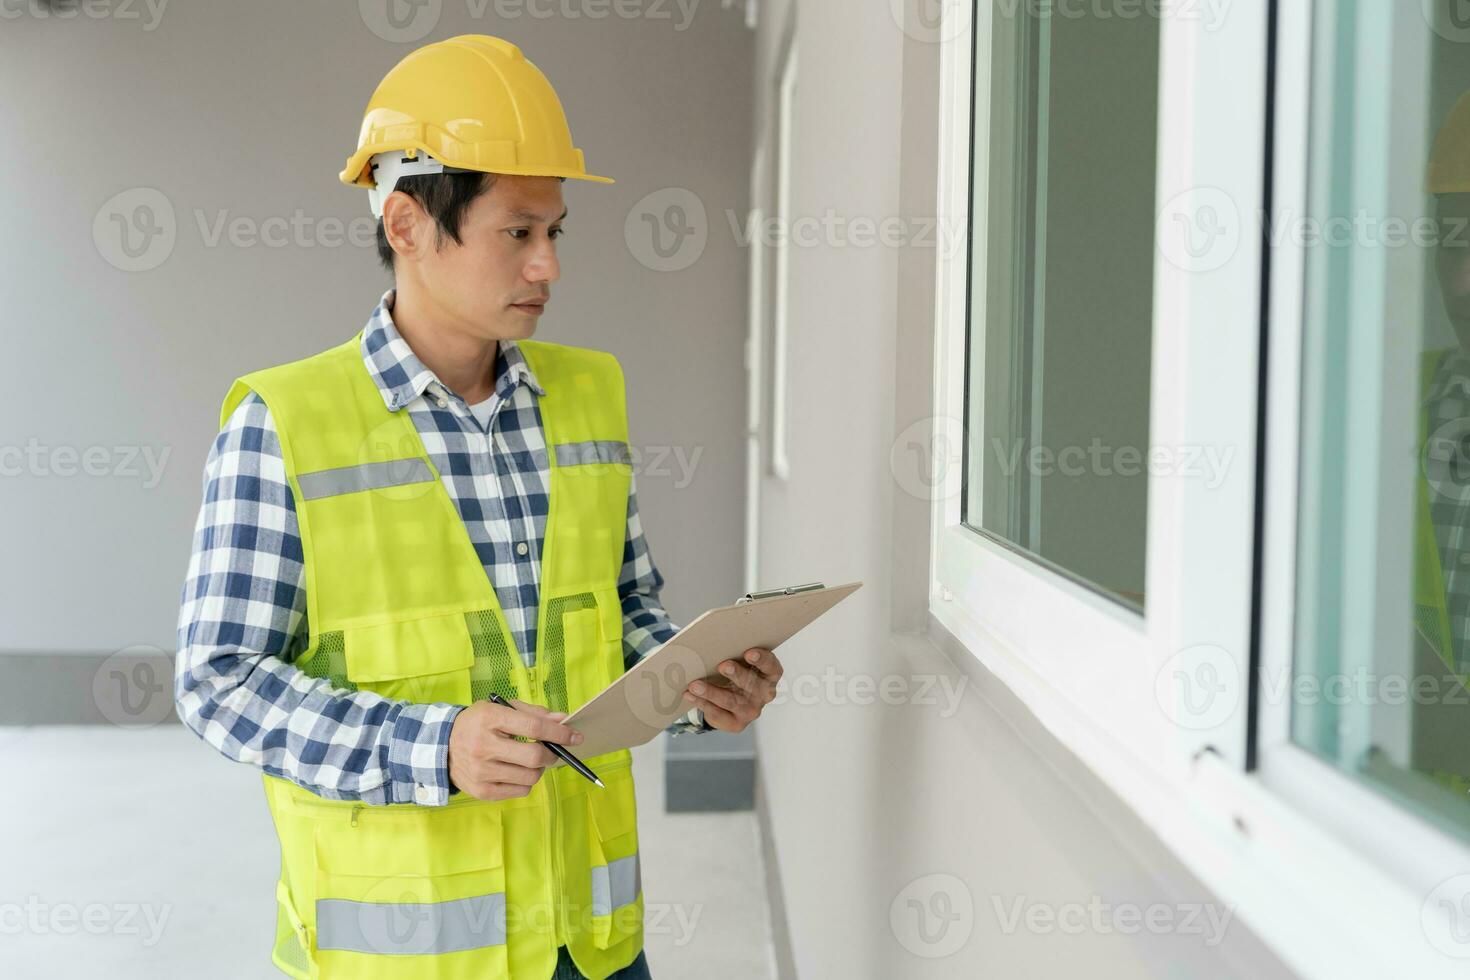 inspector or engineer is inspecting construction and quality assurance new house using a checklist. Engineers or architects or contactor work to build the house before handing it over to the homeowner photo